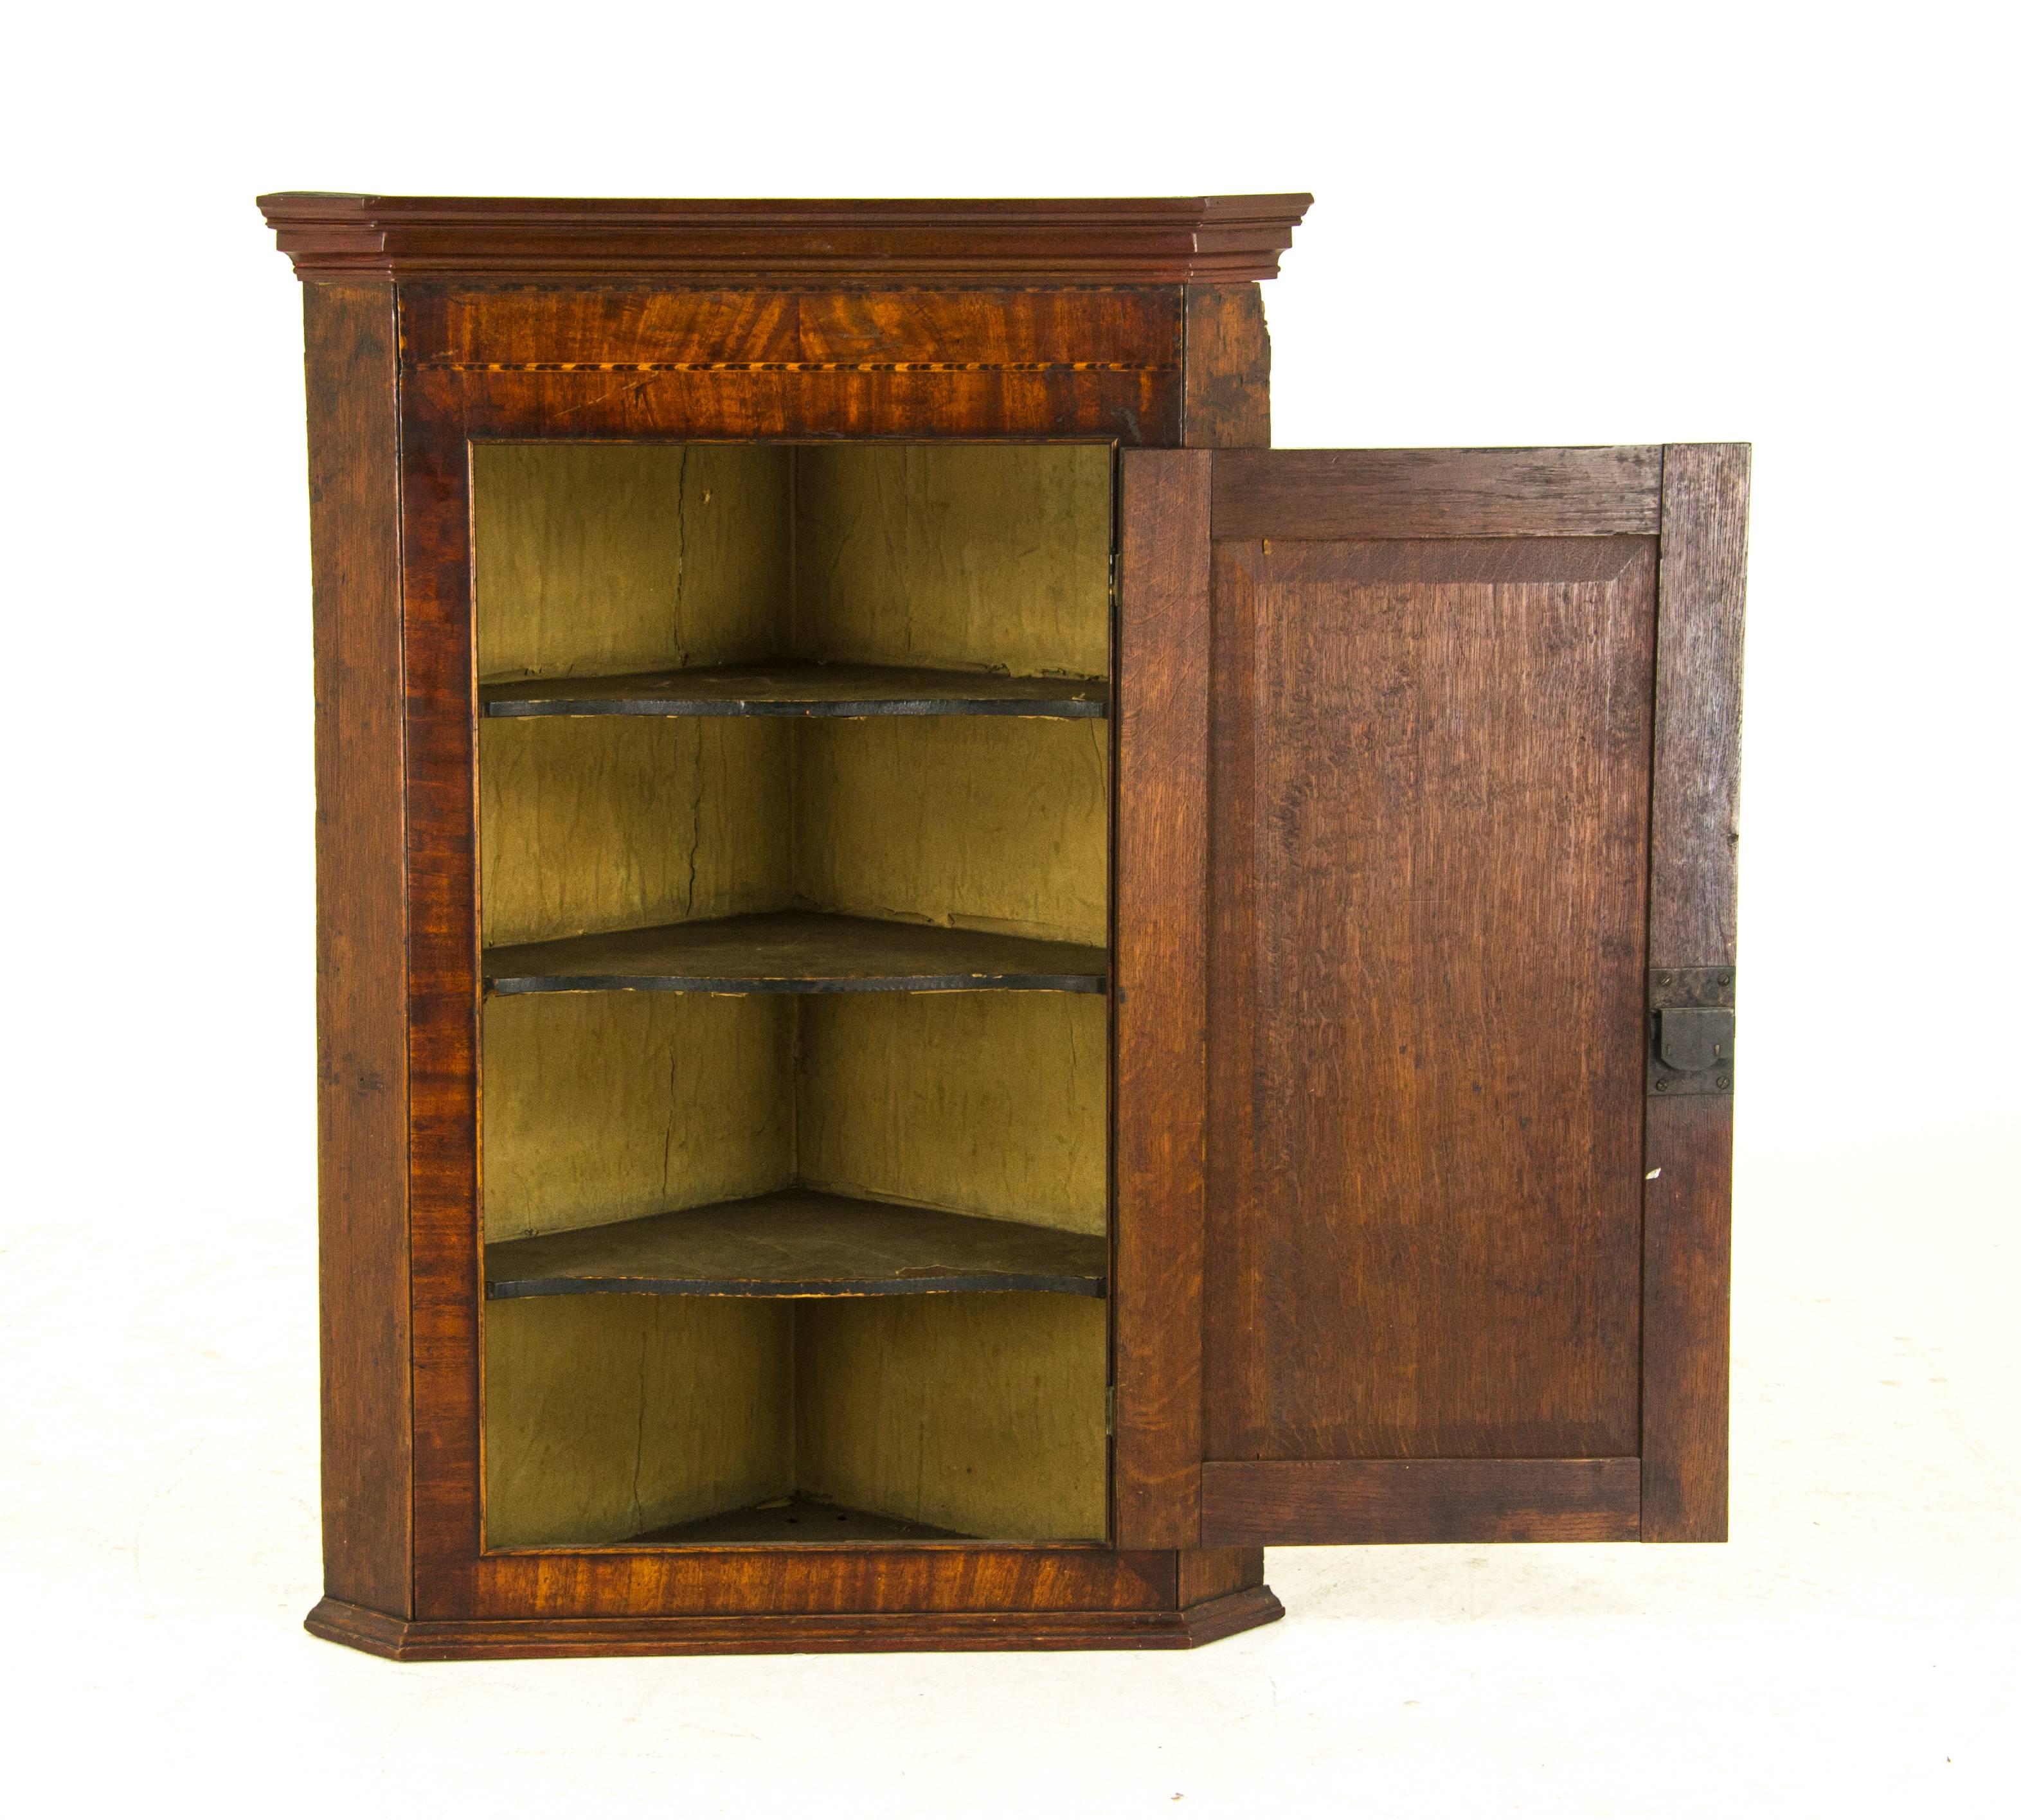 Scotland, 1790
Solid oak construction
Original finish
Moulding above with inlaid banding across the top
Single inlaid panelled door
Opening to reveal triple serpentine original fixed shelves
Ending with crown moulding to base
Lock works and